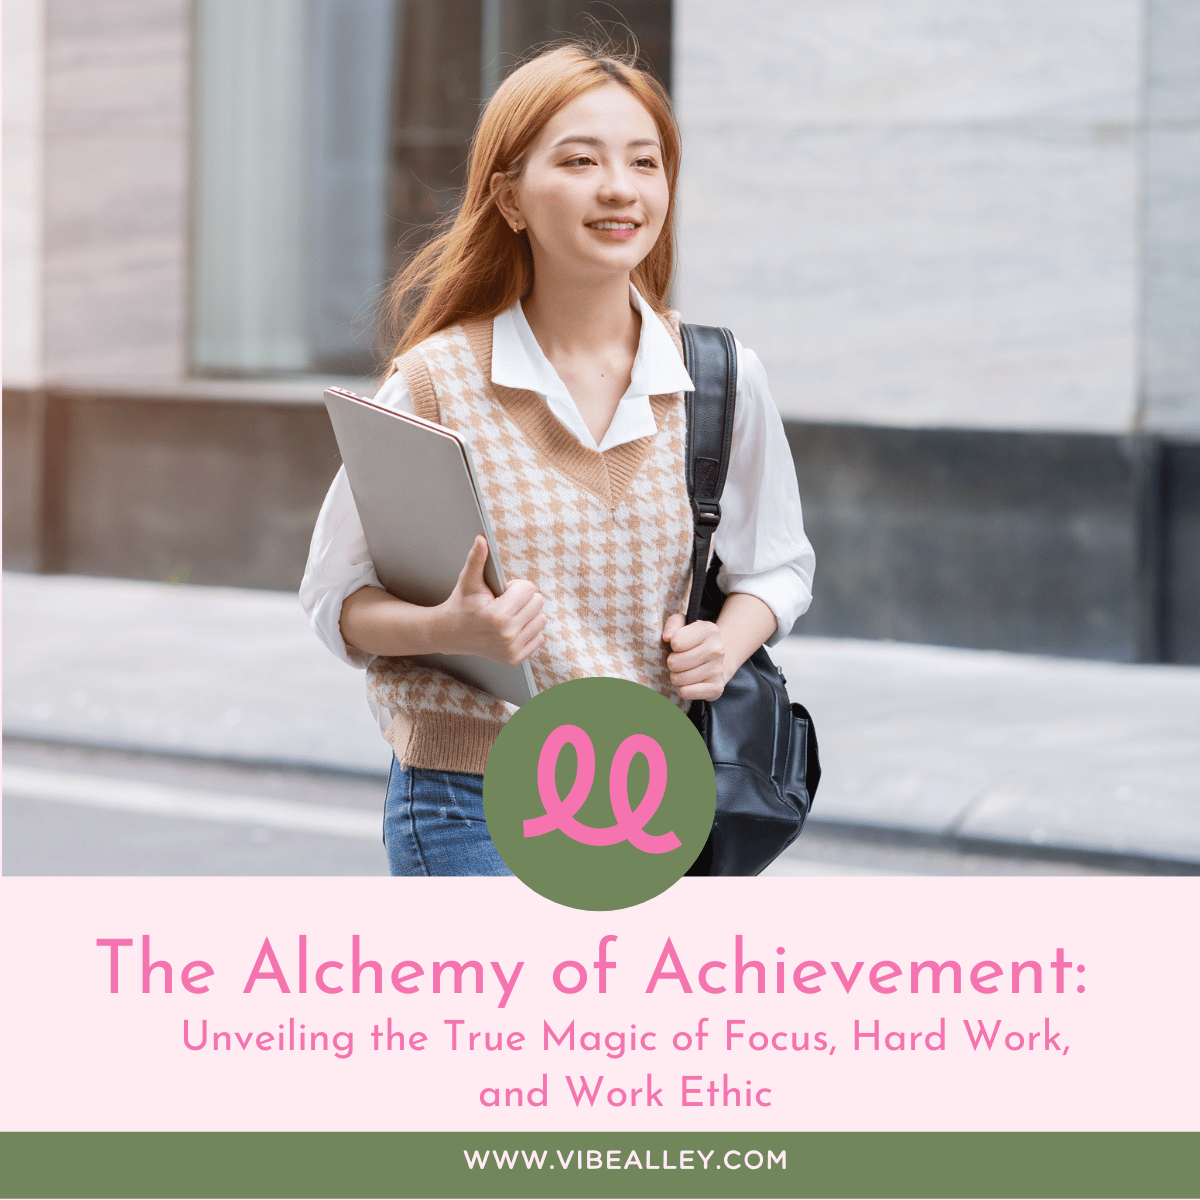 The Alchemy of Achievement: Unveiling the True Magic of Focus, Hard Work, and Work Ethic